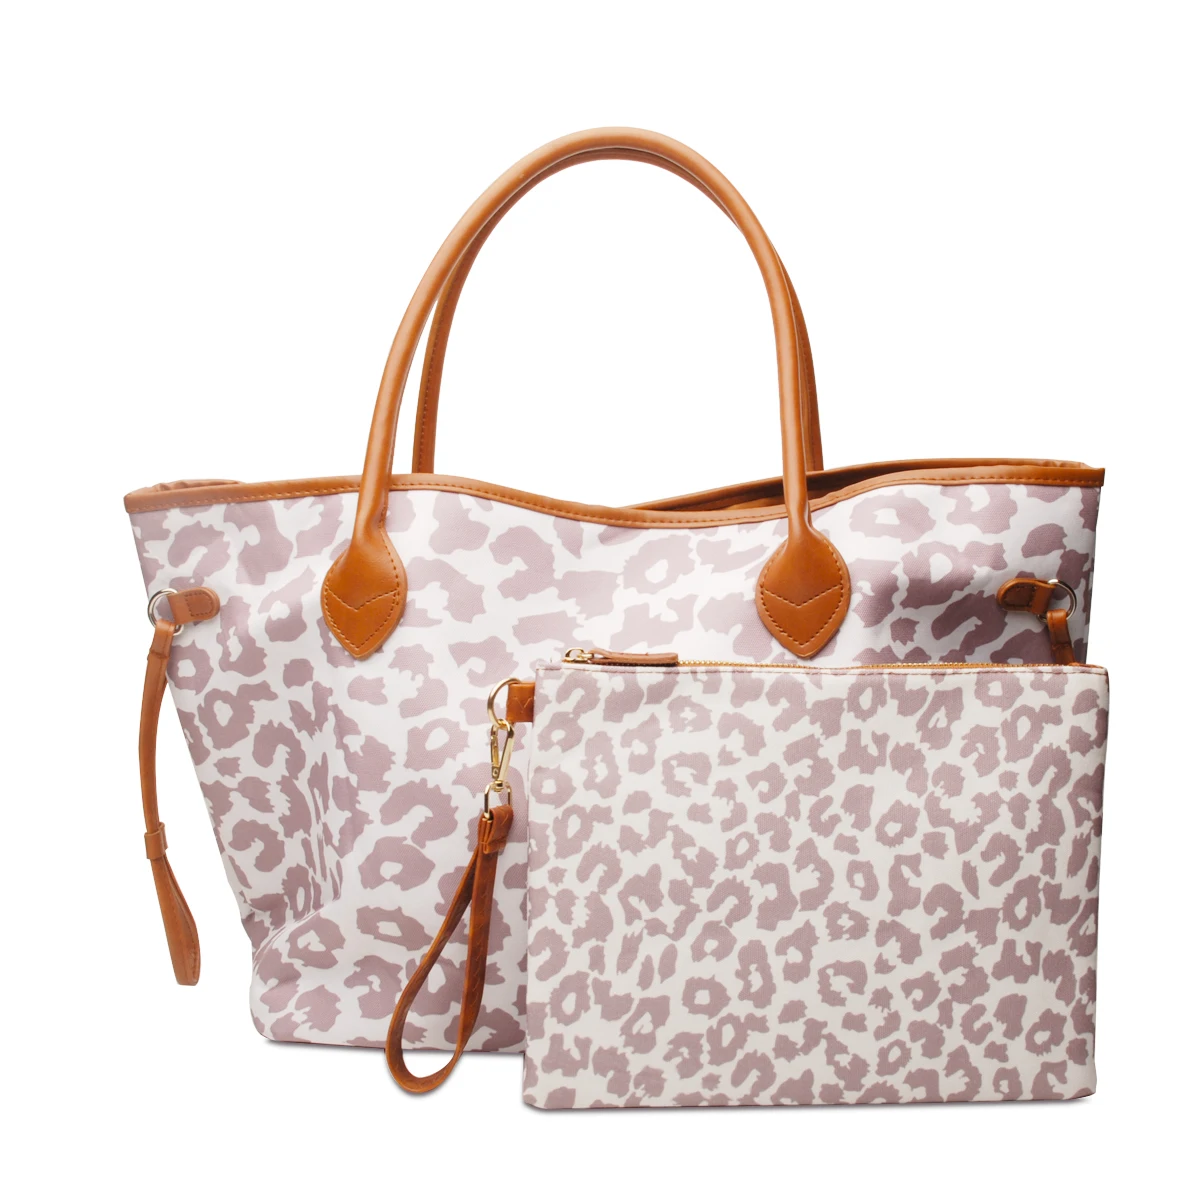 

DOMIL White Leopard Canvas Handbag Monogram Tote Bags Cheetah Weekender Travel Large Shopping Purse for Women Ladies, As pictures